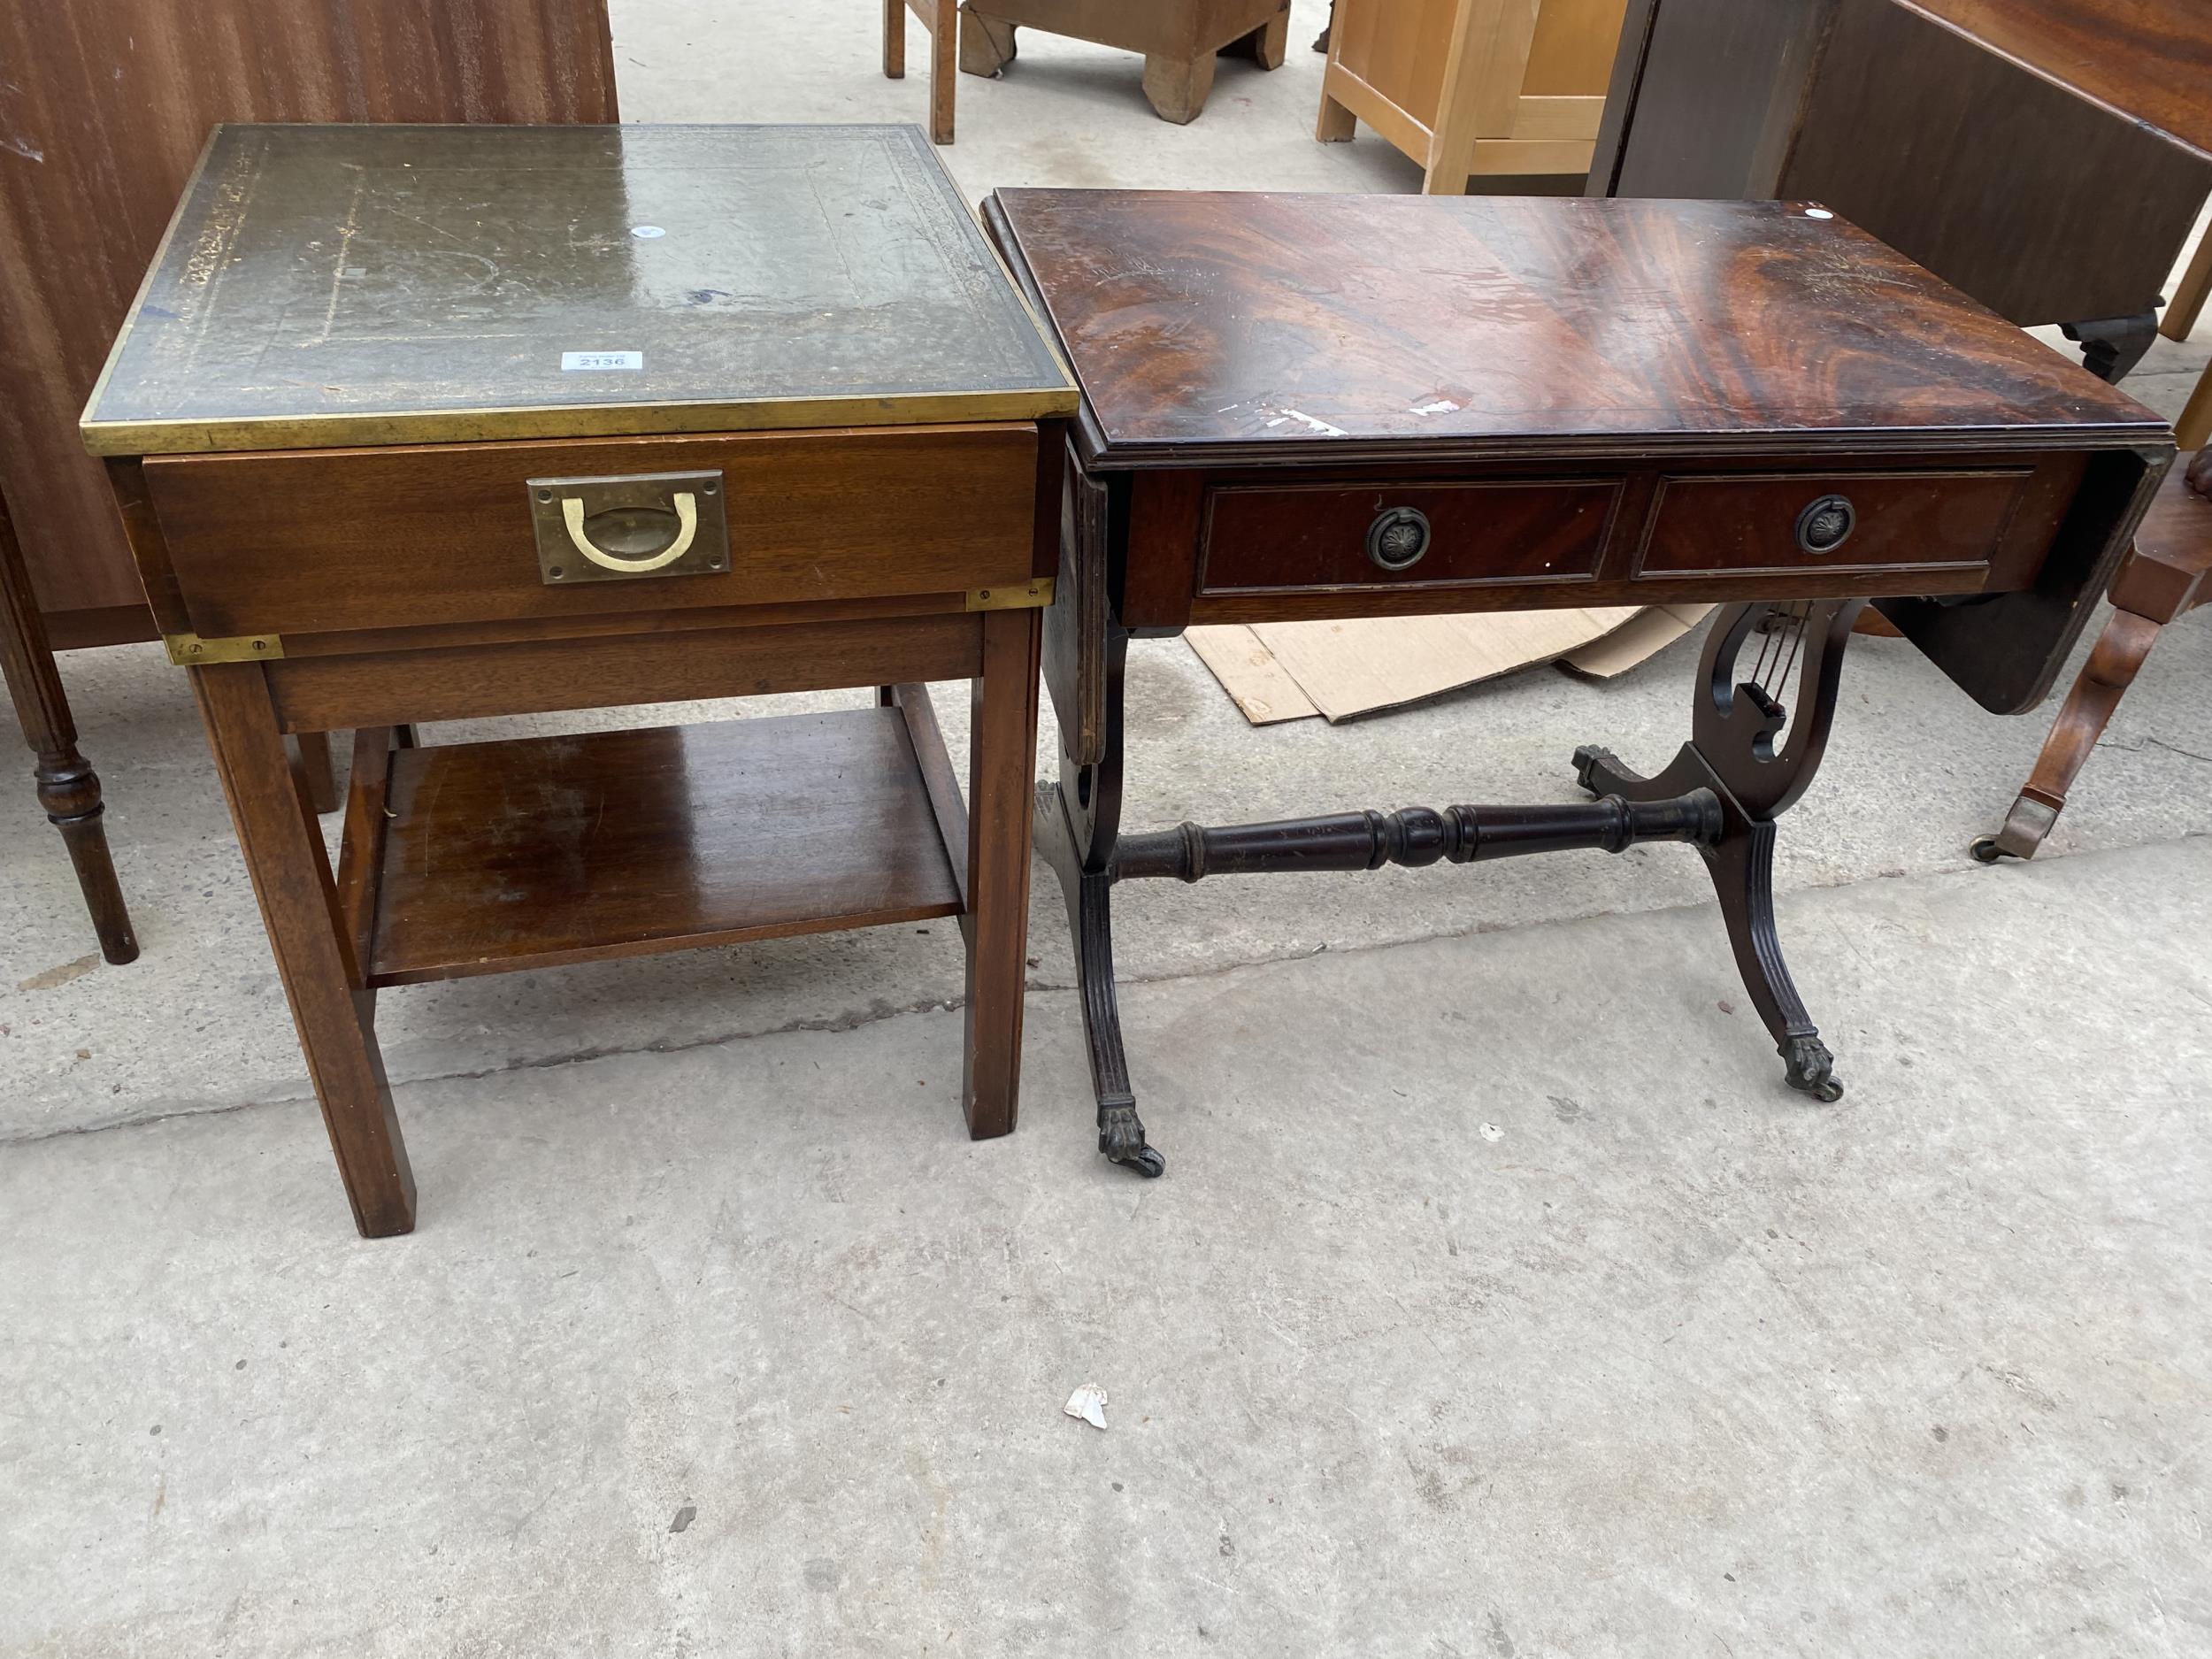 AN ANTIQUE STYLE LAMP TABLE AND MINIATURE SOFA TABLE